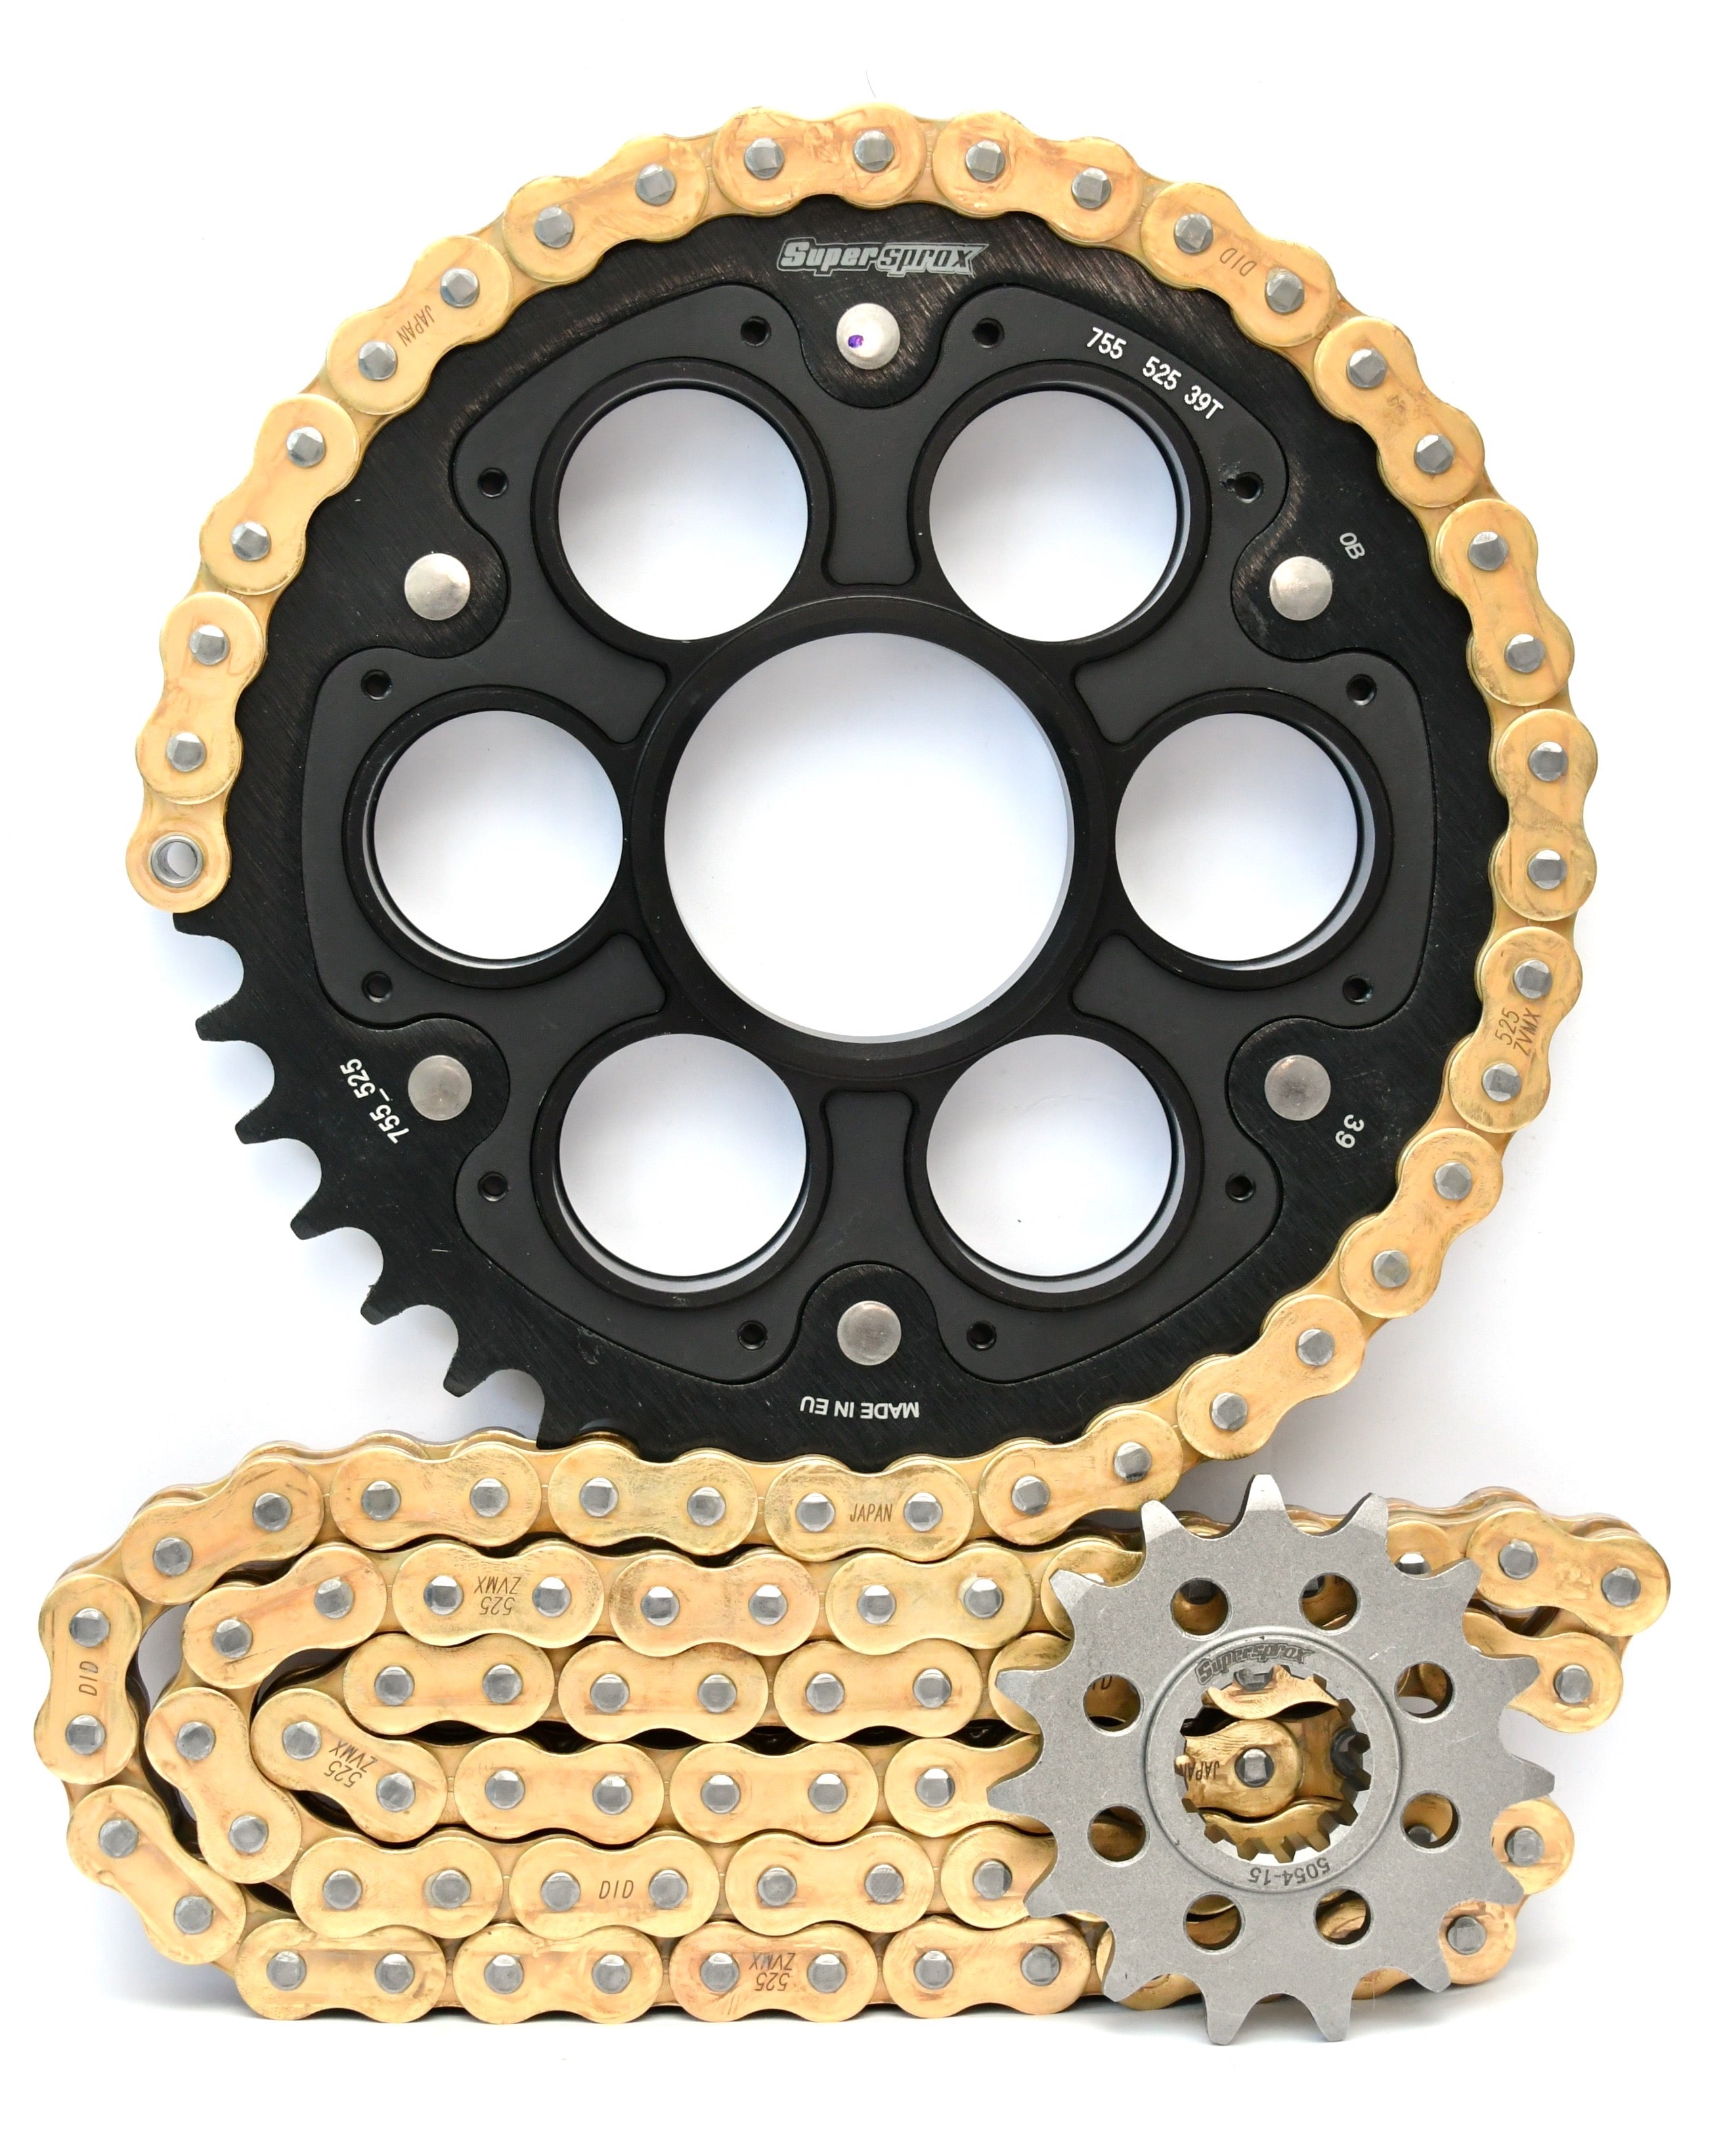 Supersprox Chain & Sprocket Kit for Ducati Panigale V4 and V4S - Standard Gearing